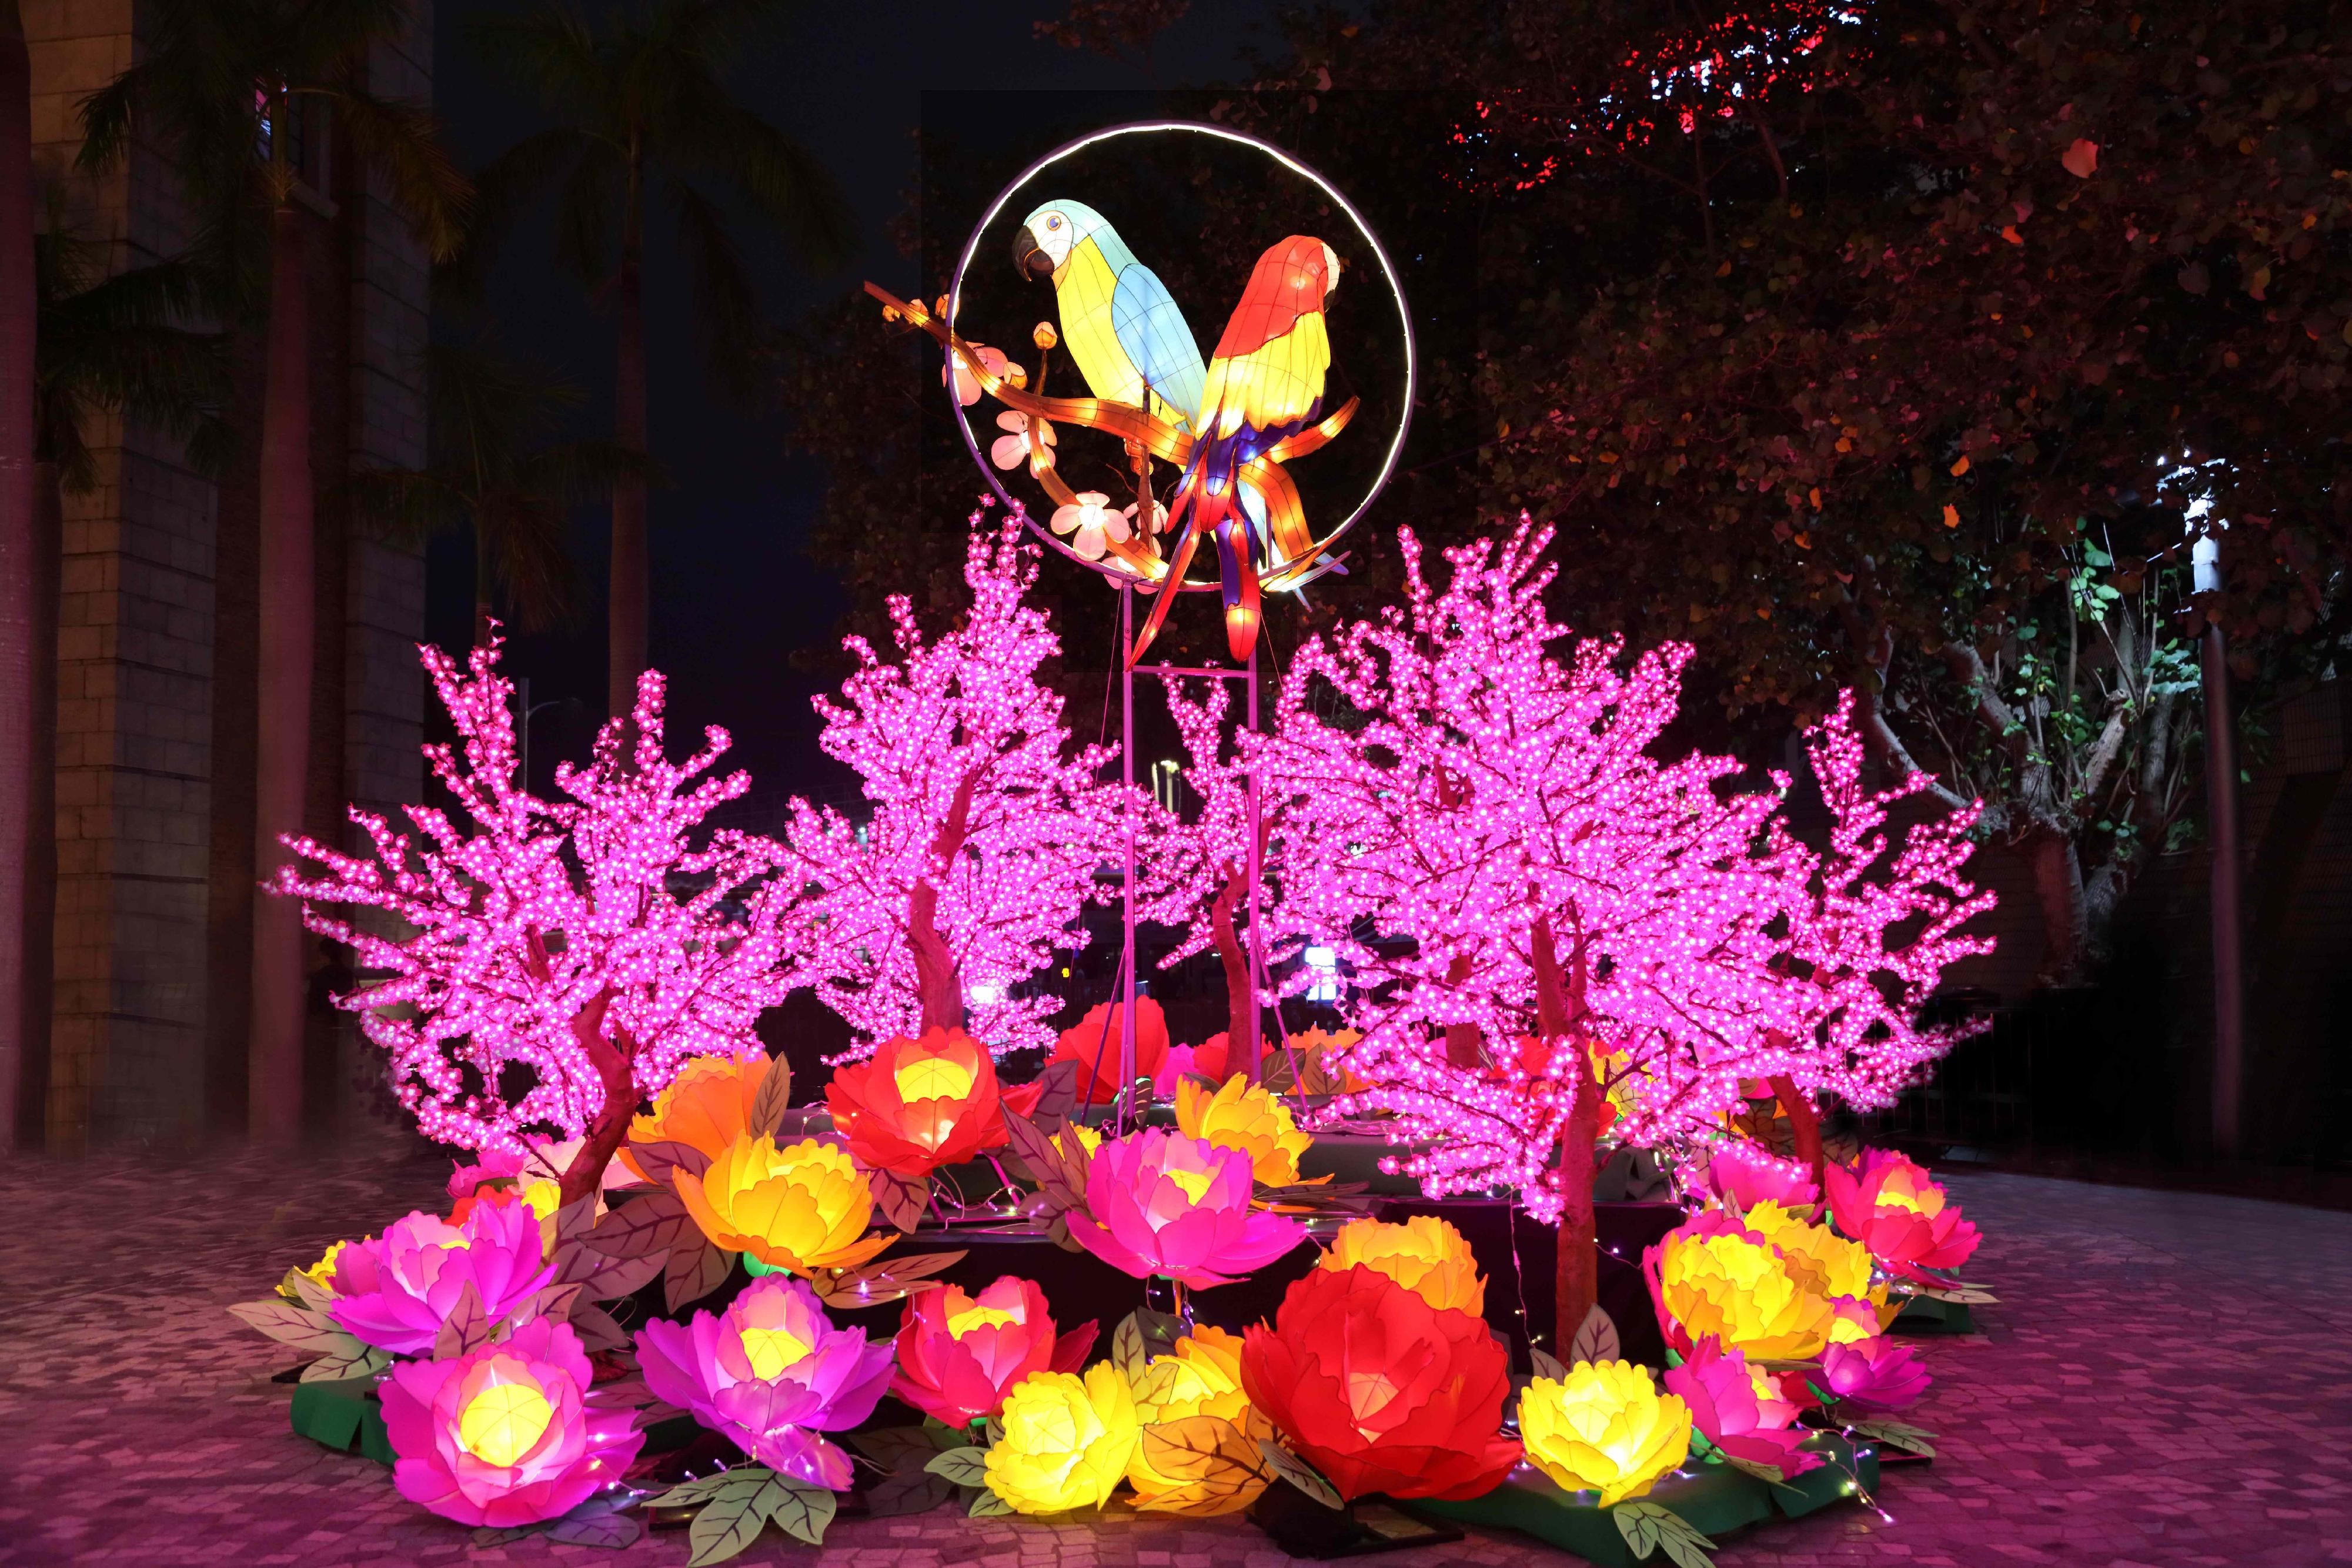 To celebrate the festive season with the public, the Leisure and Cultural Services Department is presenting the Lunar New Year Lantern Carnivals at the Hong Kong Cultural Centre Piazza, Hong Kong Velodrome Park, Tin Shui Wai Park and Ginza Square from today (February 20) until February 25. Picture shows colourful lanterns at the Hong Kong Cultural Centre Piazza.